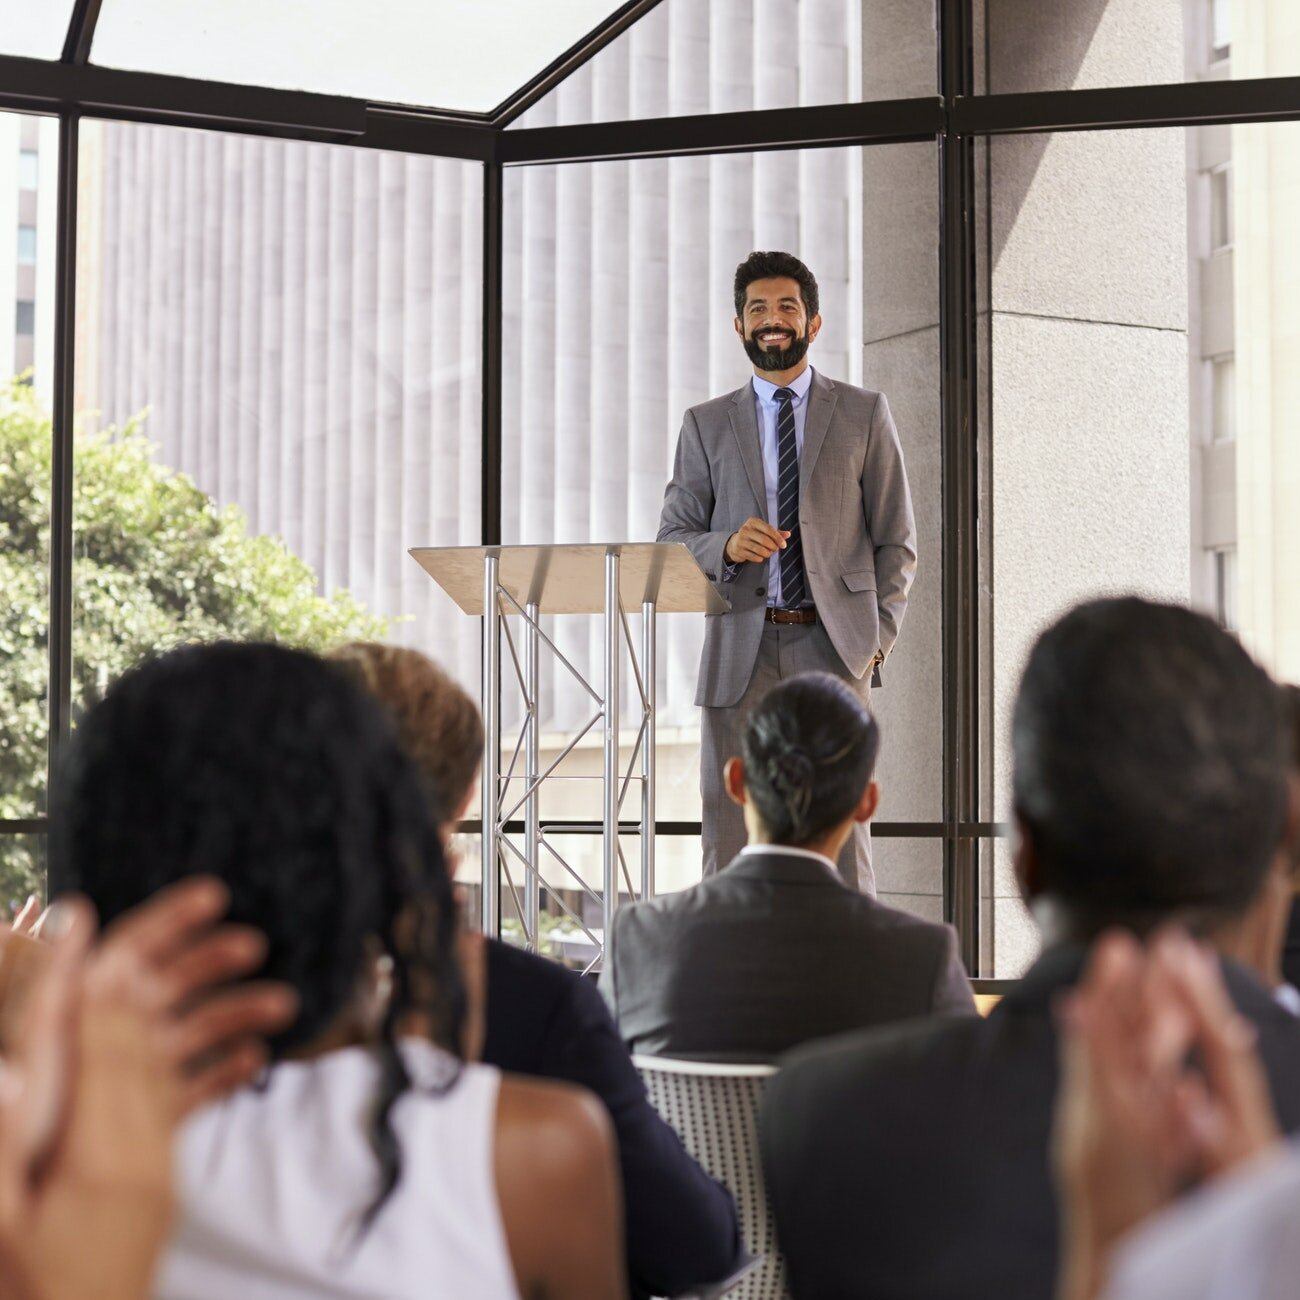 Audience applauding speaker at a business seminar